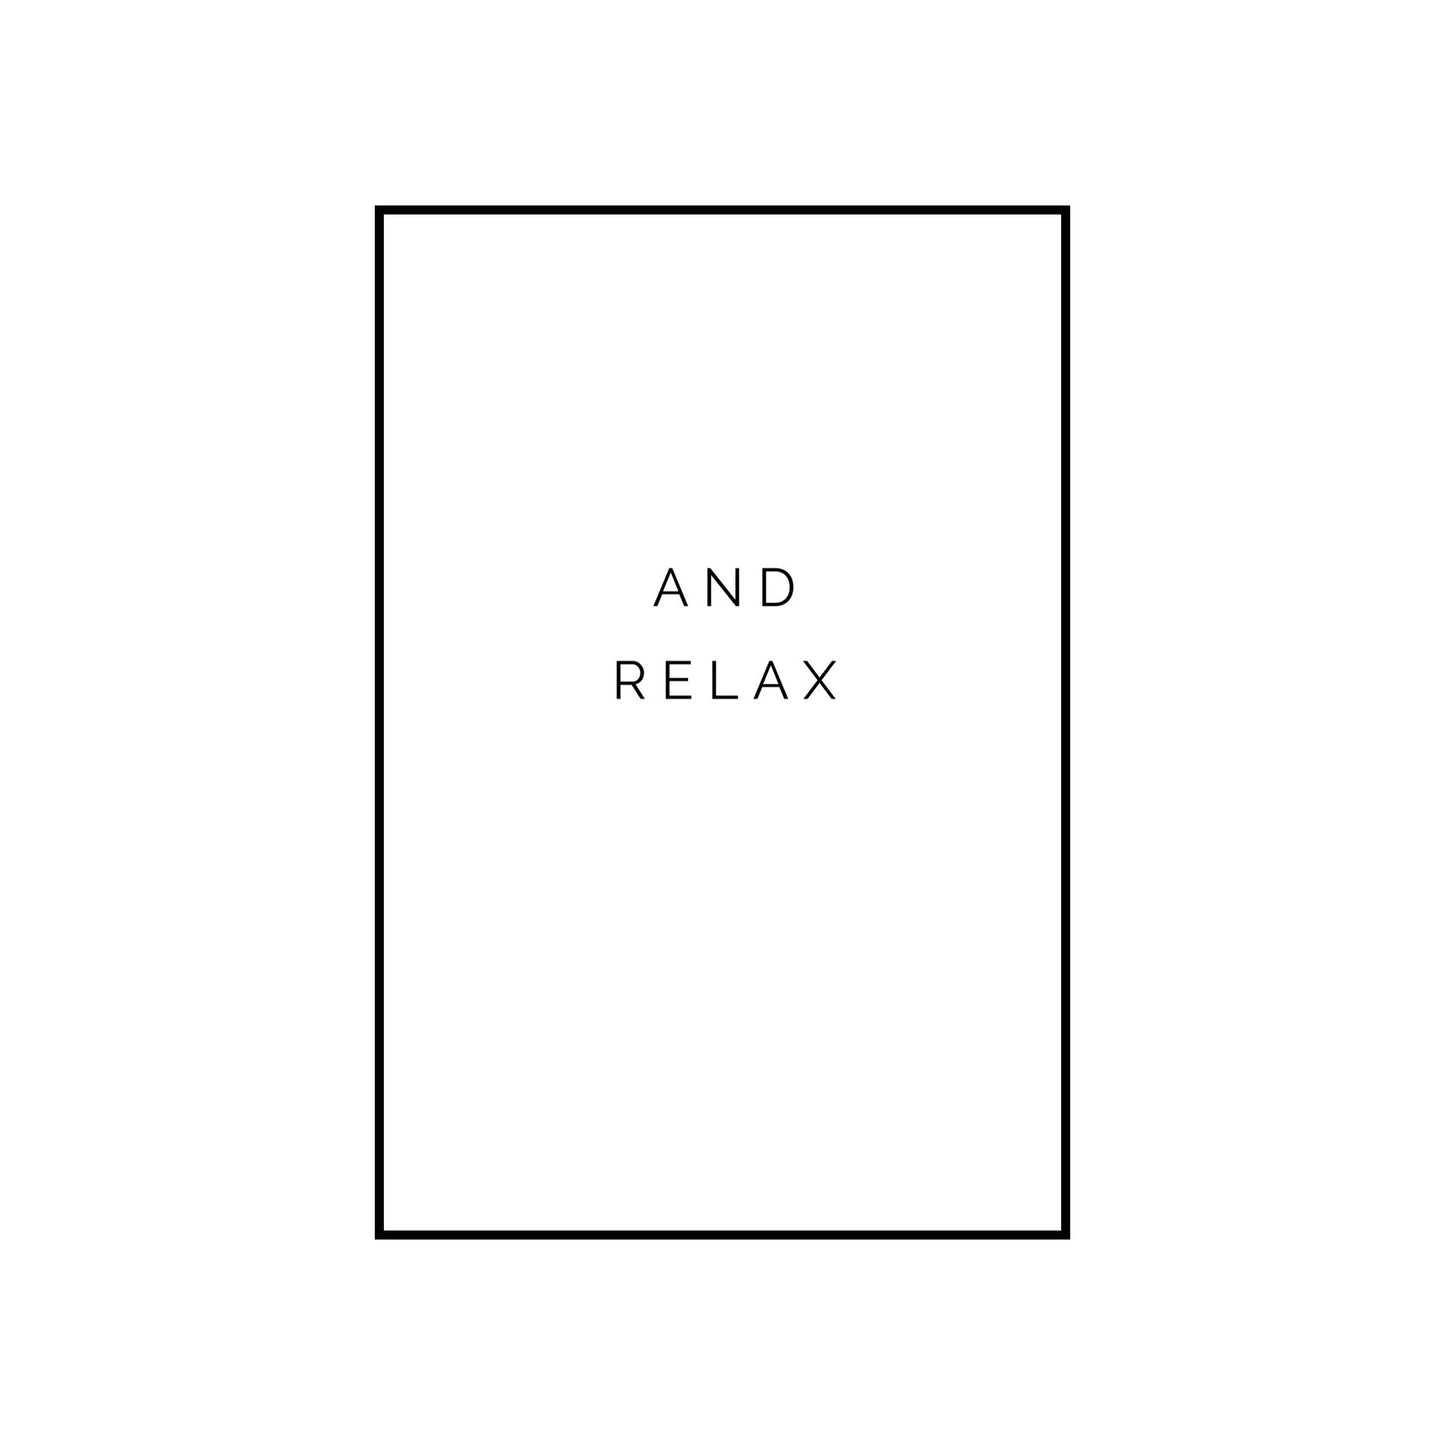 Relax - THE WALL STYLIST